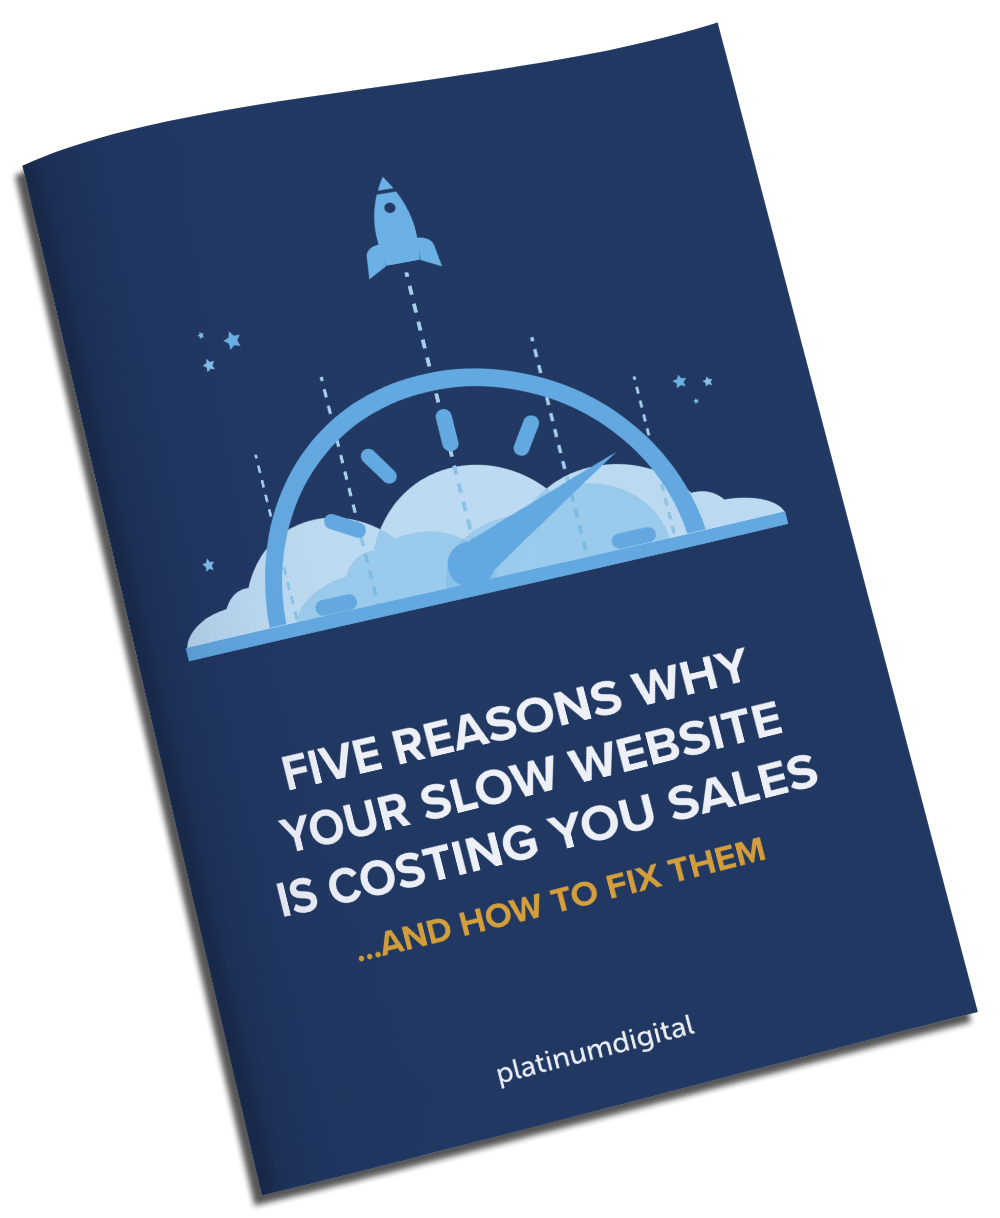 5 Reasons Why Your Slow Website Is Costing You Sales eBook